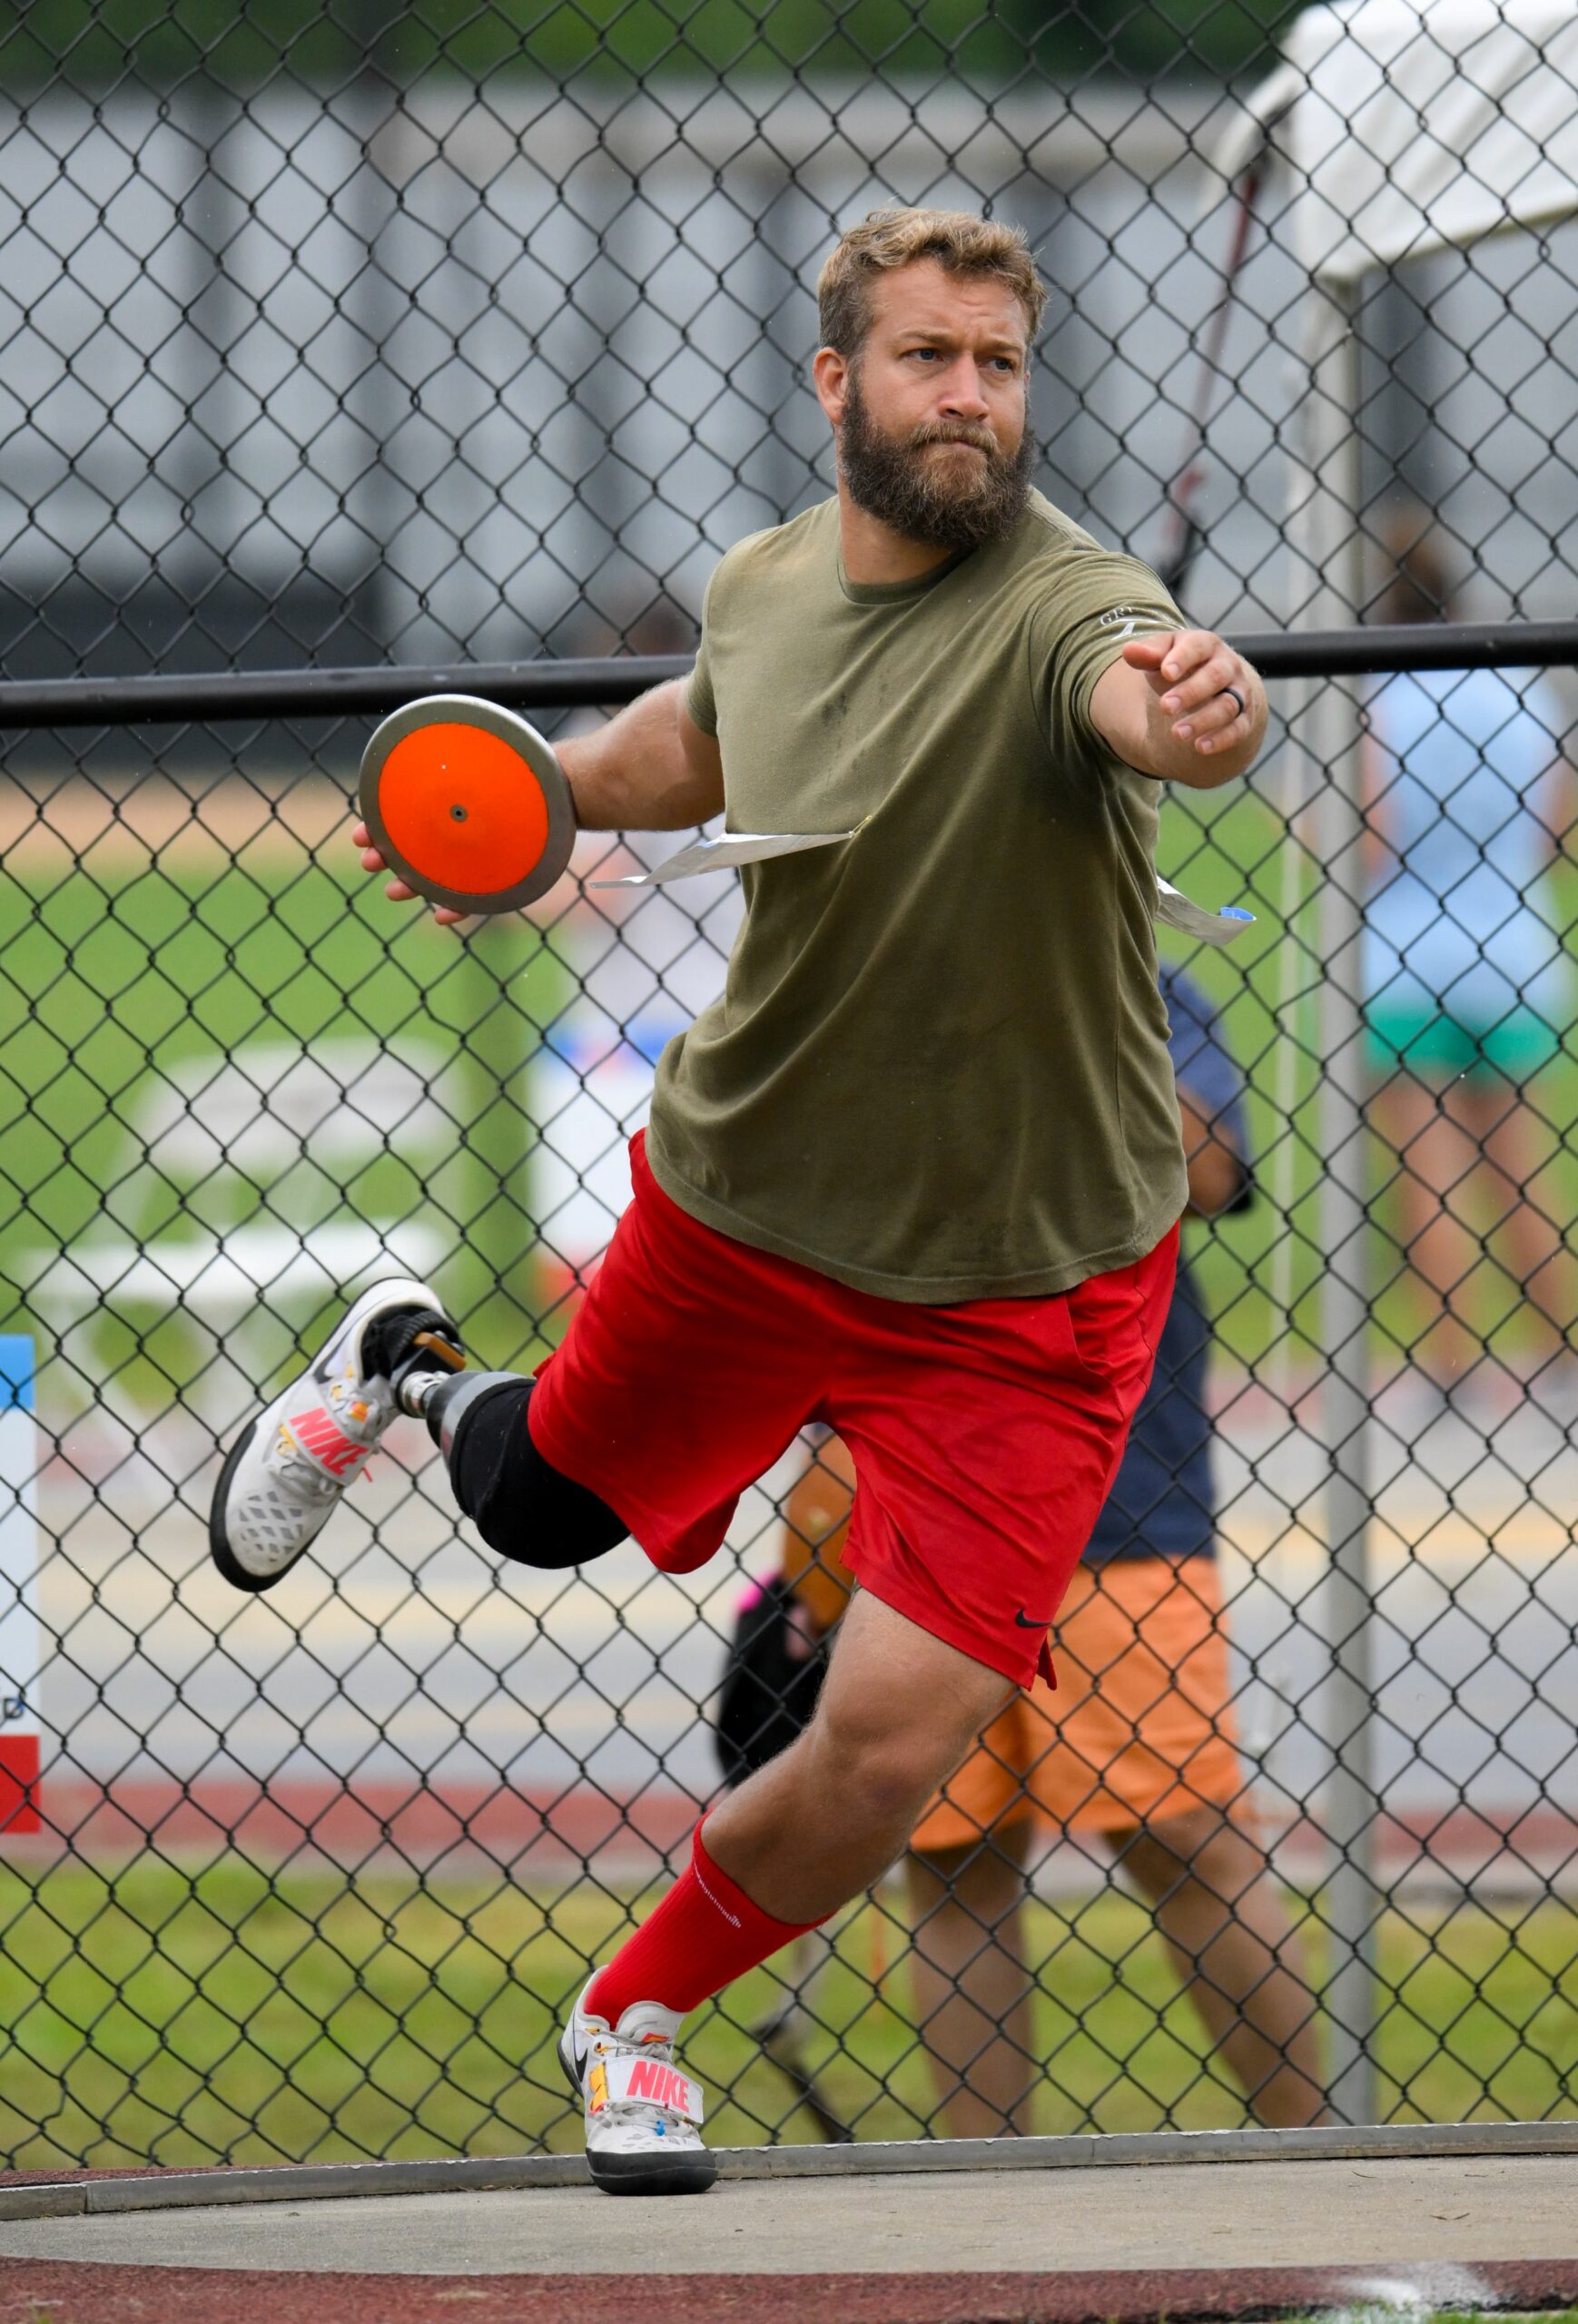 Athlete in discus ring with discus in hand about to throw. Athlete mid-spin before releasing the discus.